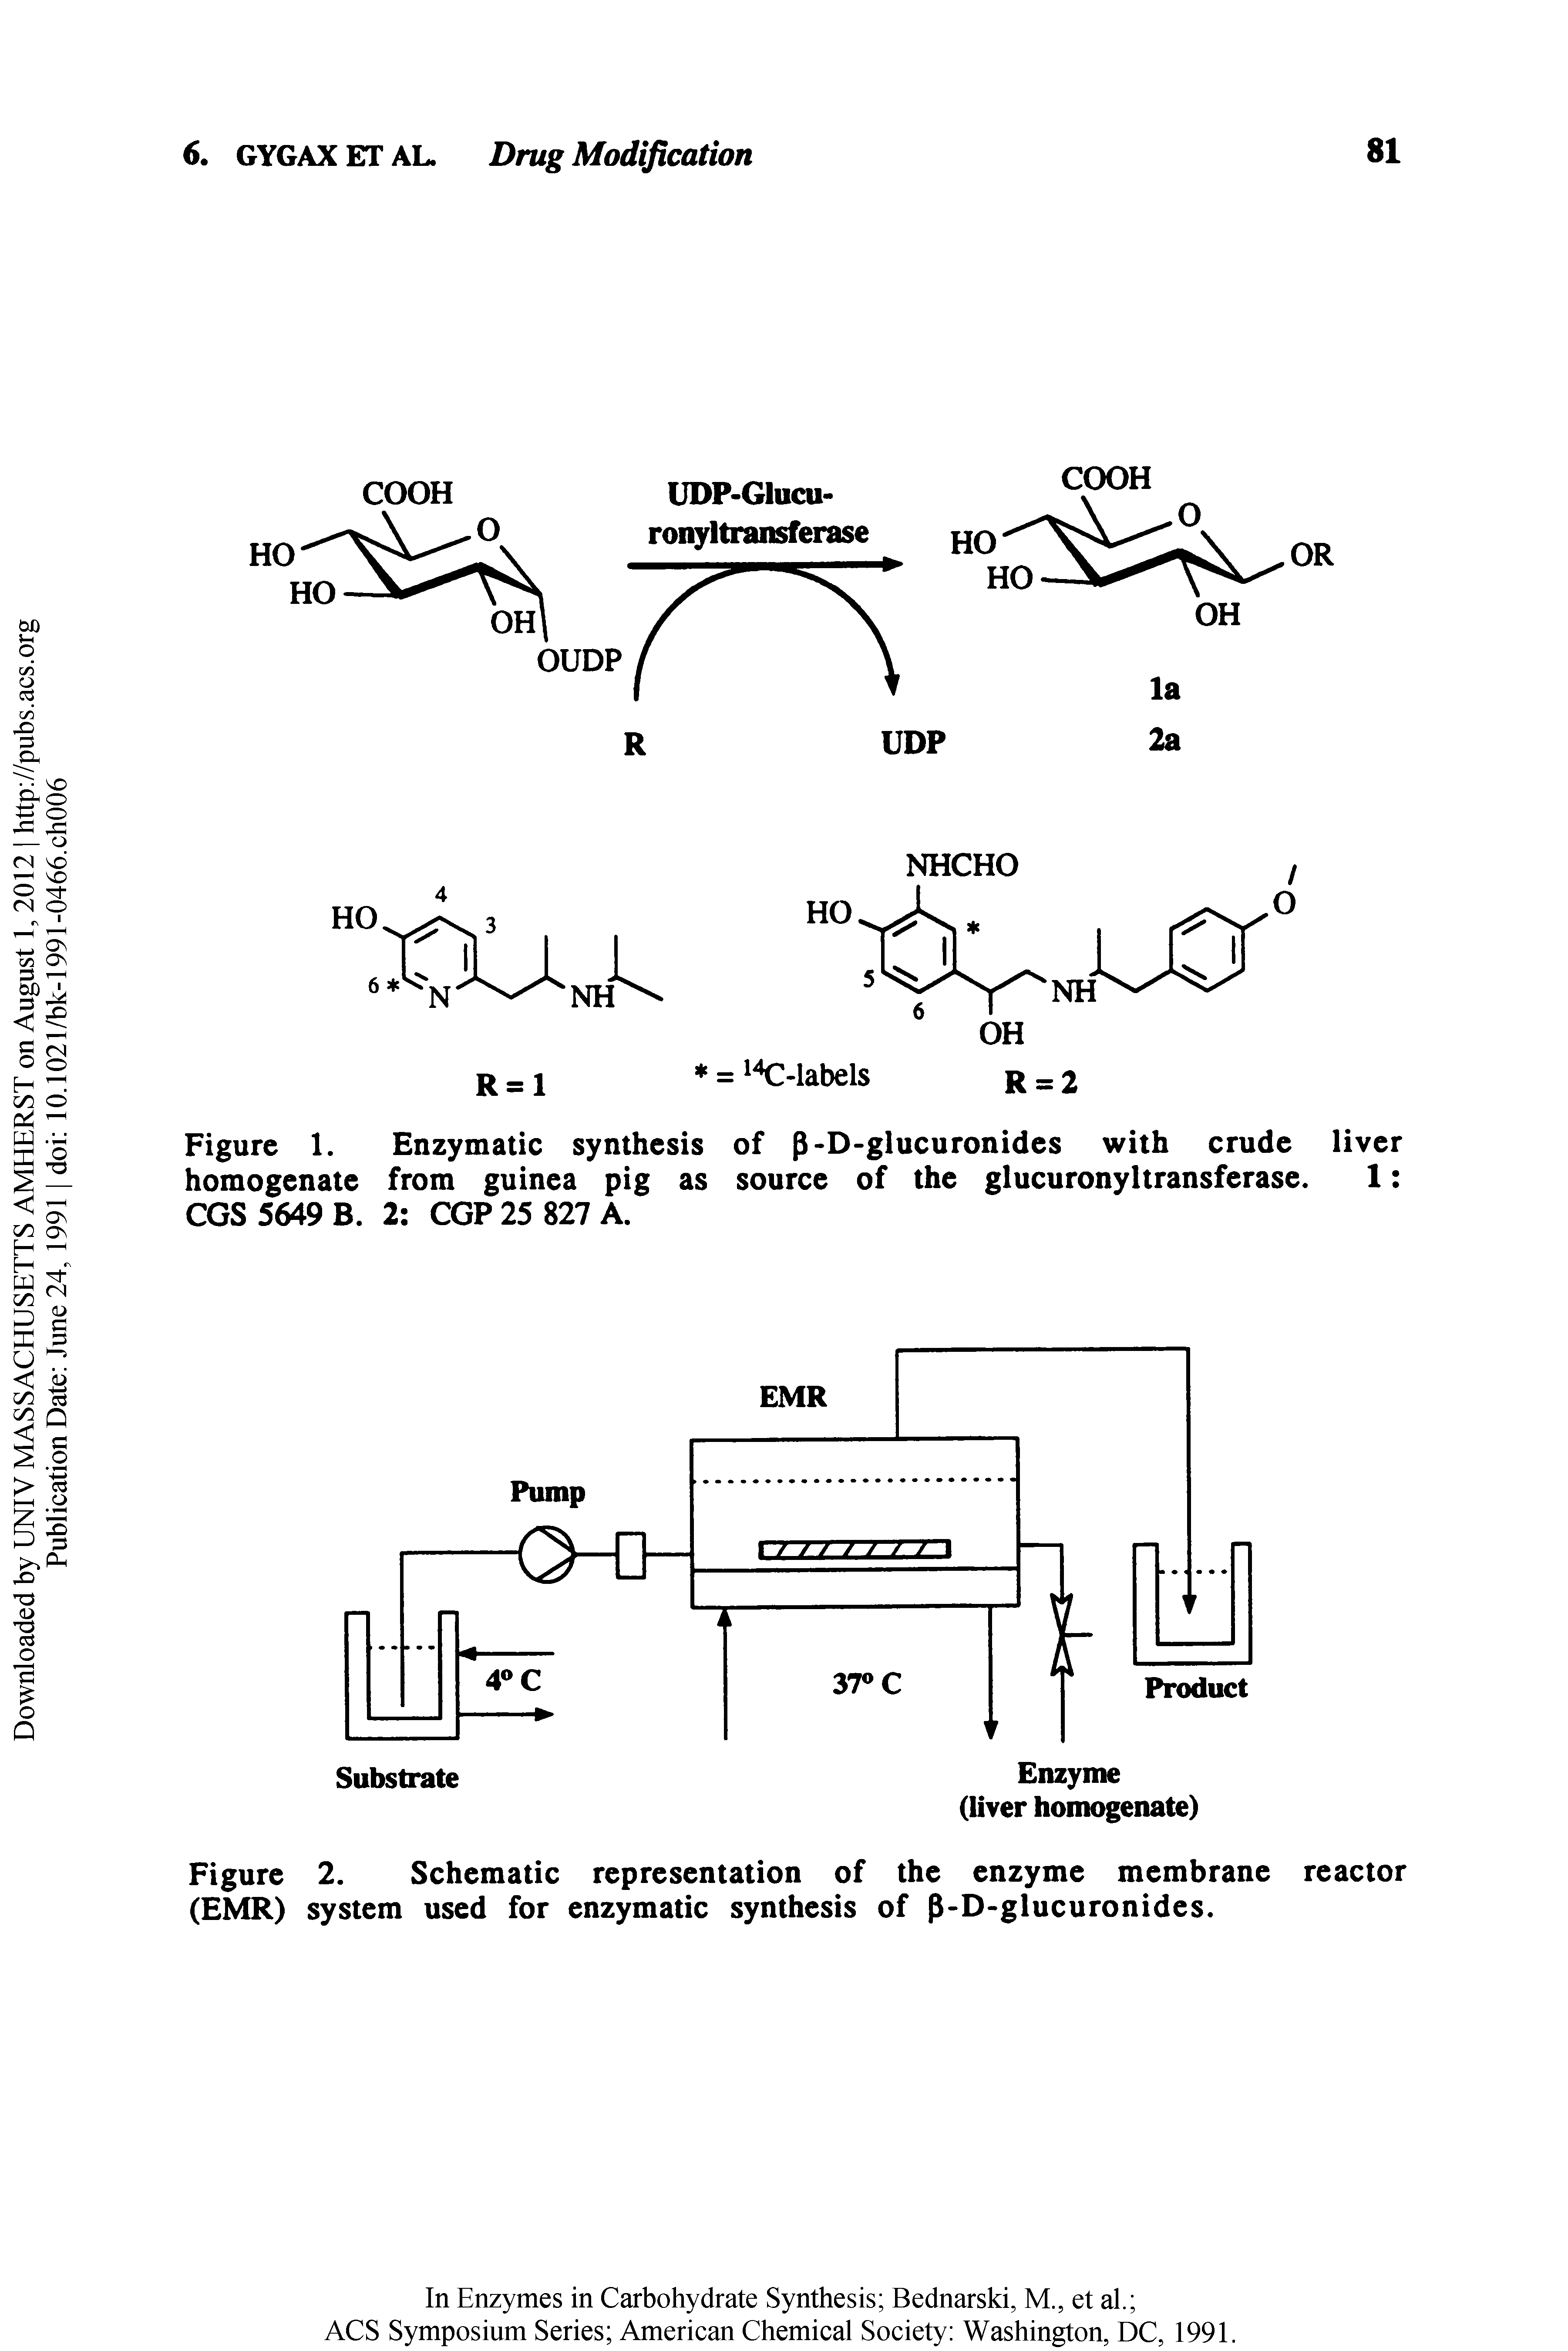 Figure 2. Schematic representation of the enzyme membrane reactor (EMR) system used for enzymatic synthesis of P-D>glucuronides.